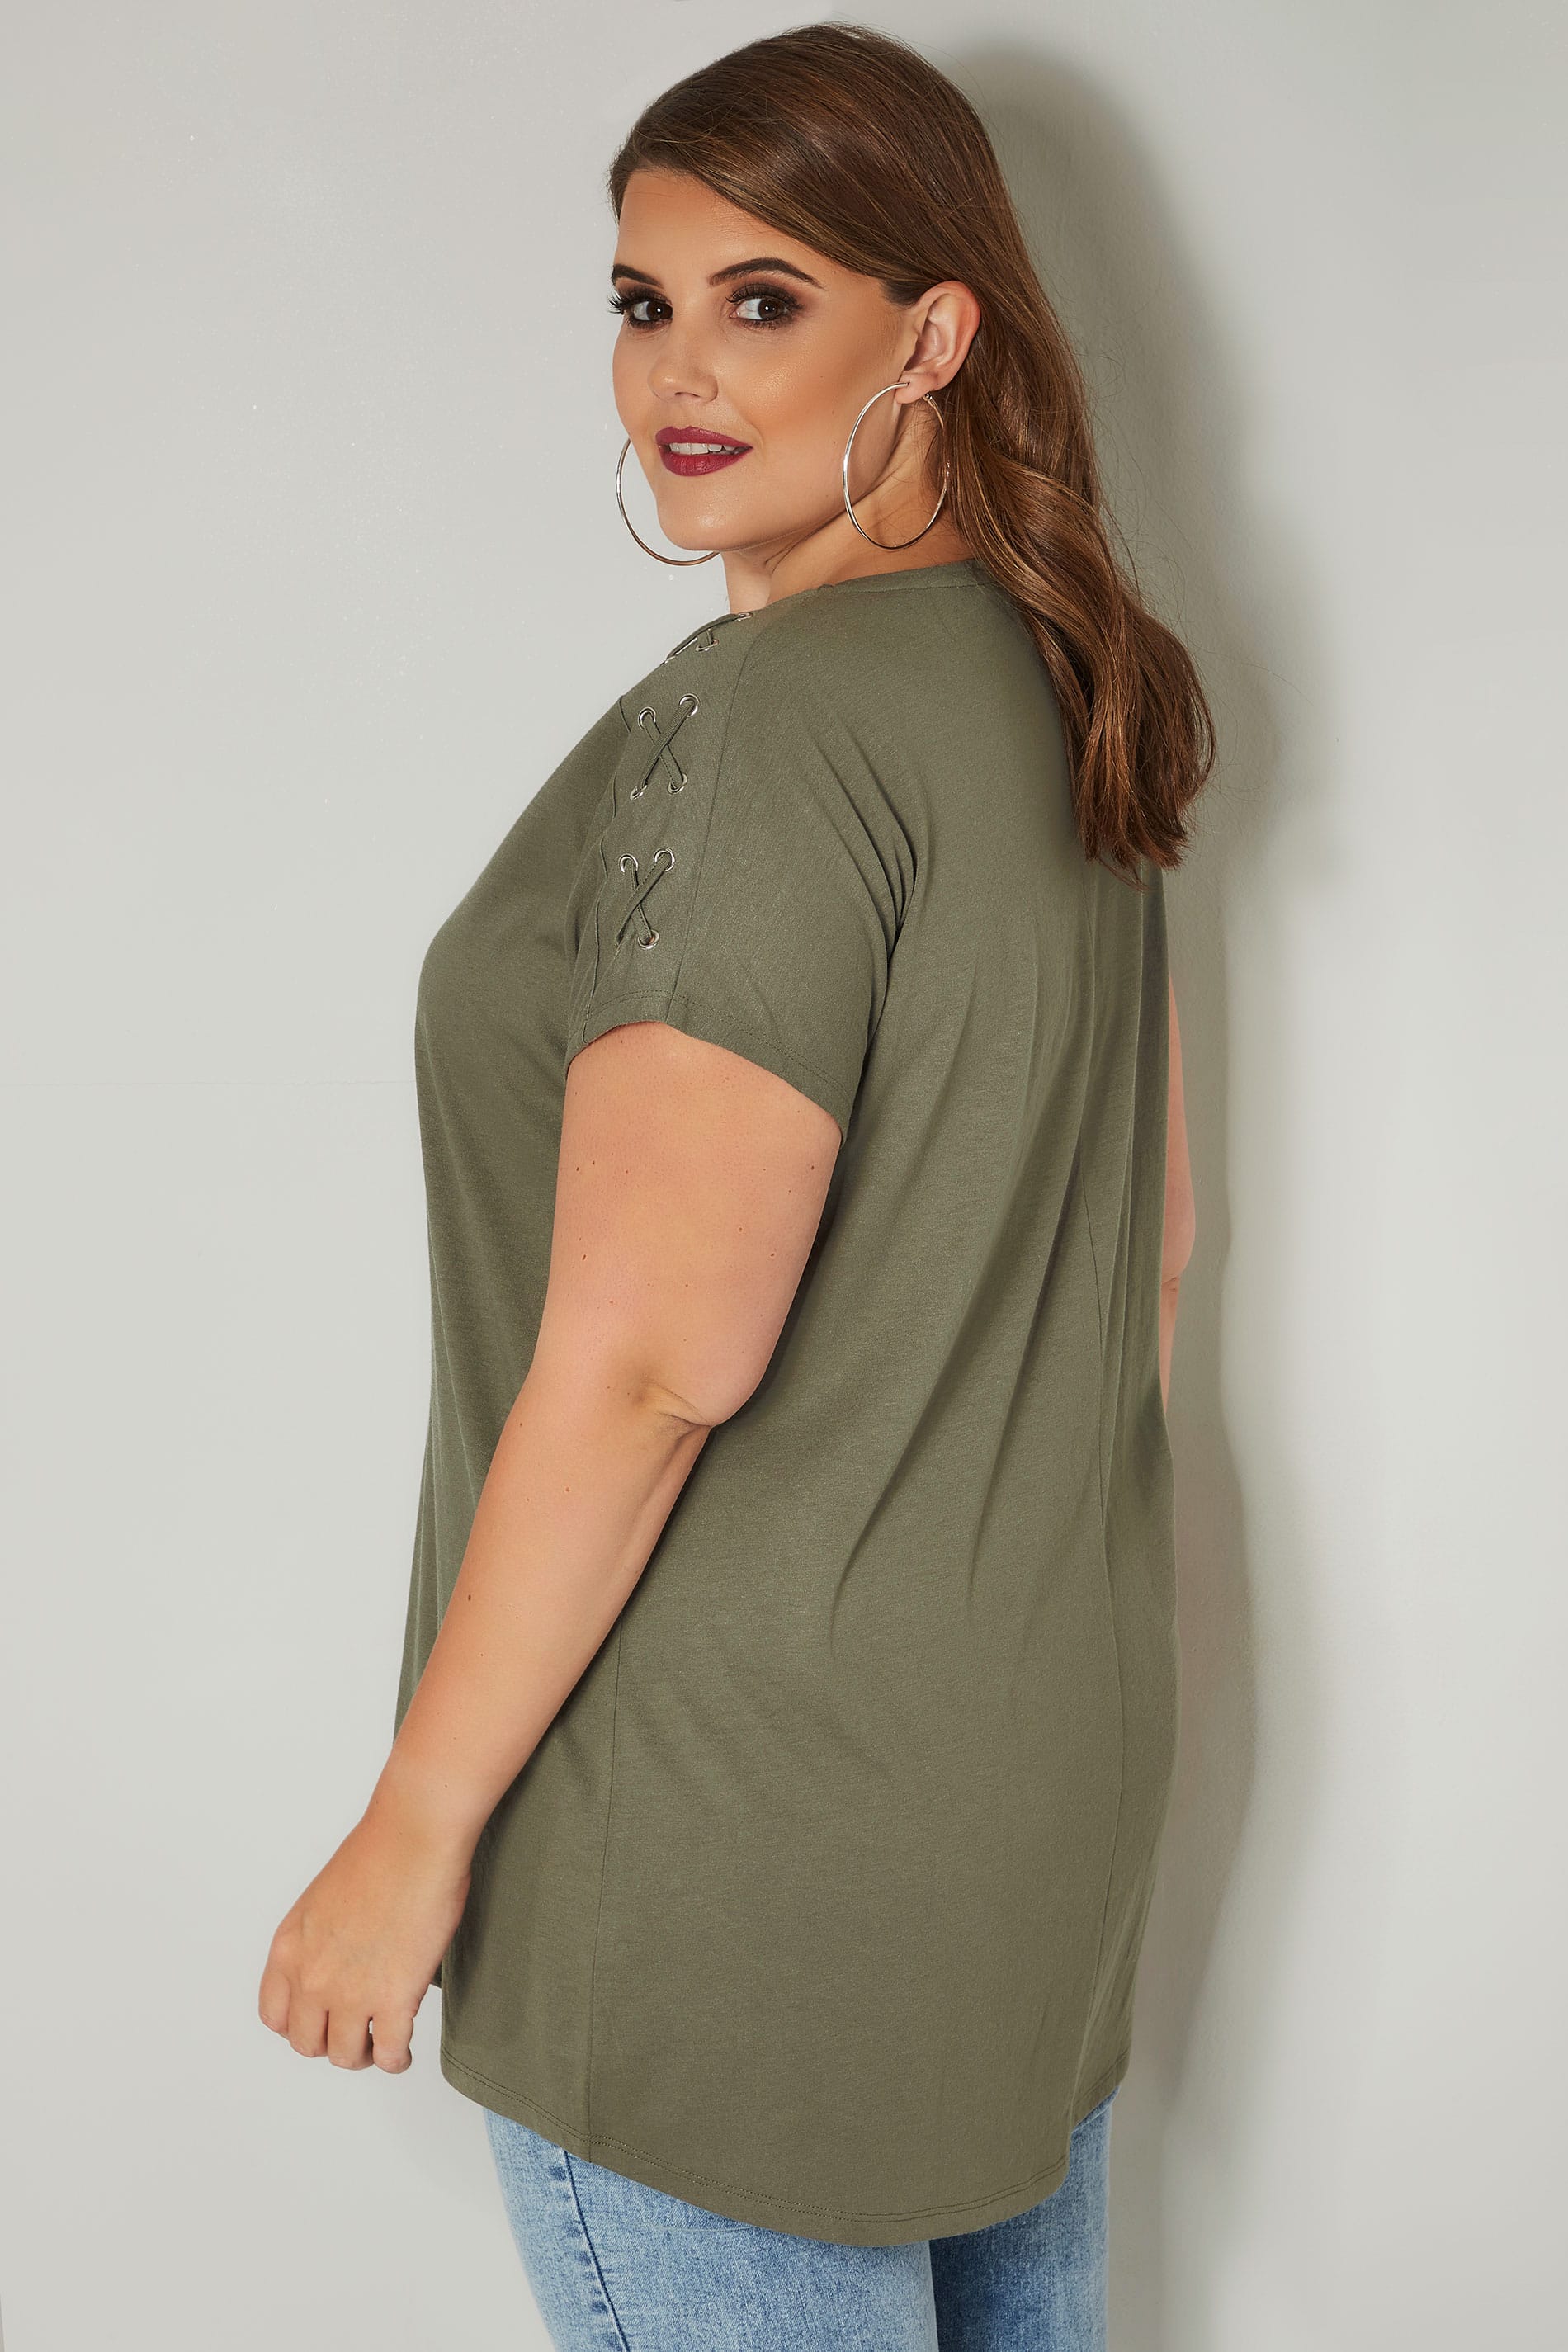 Khaki Jersey Top With Lace Eyelet Details, plus size 16 to 36